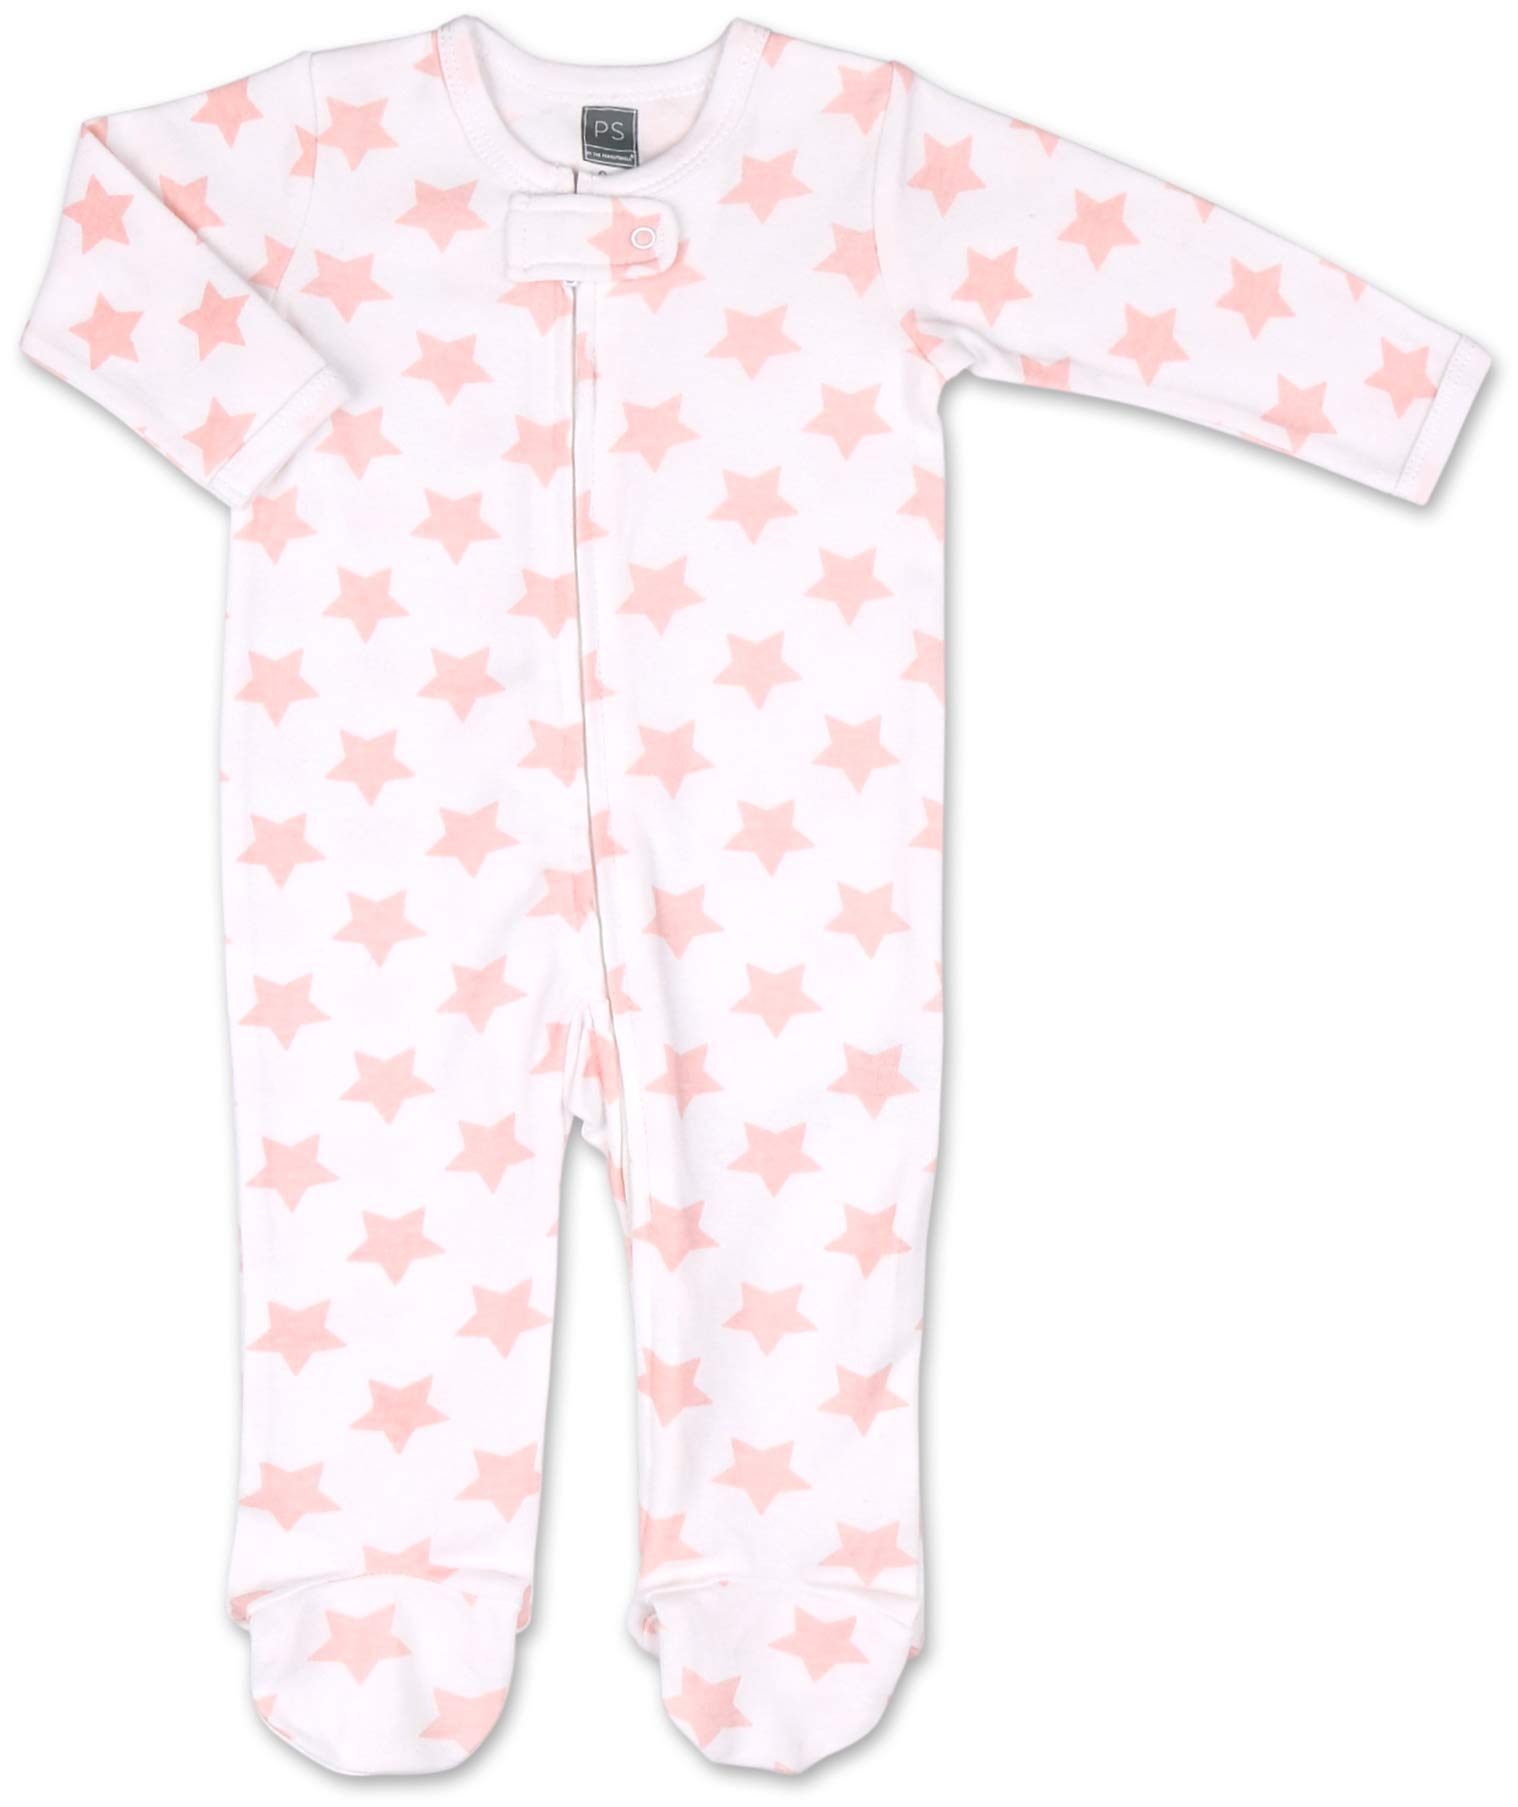 The Peanutshell Baby Sleeper Set for Baby Girls | 3 Pack in Pink Floral, Blush, & Stars | Newborn to 9M Footed Girl Pajamas